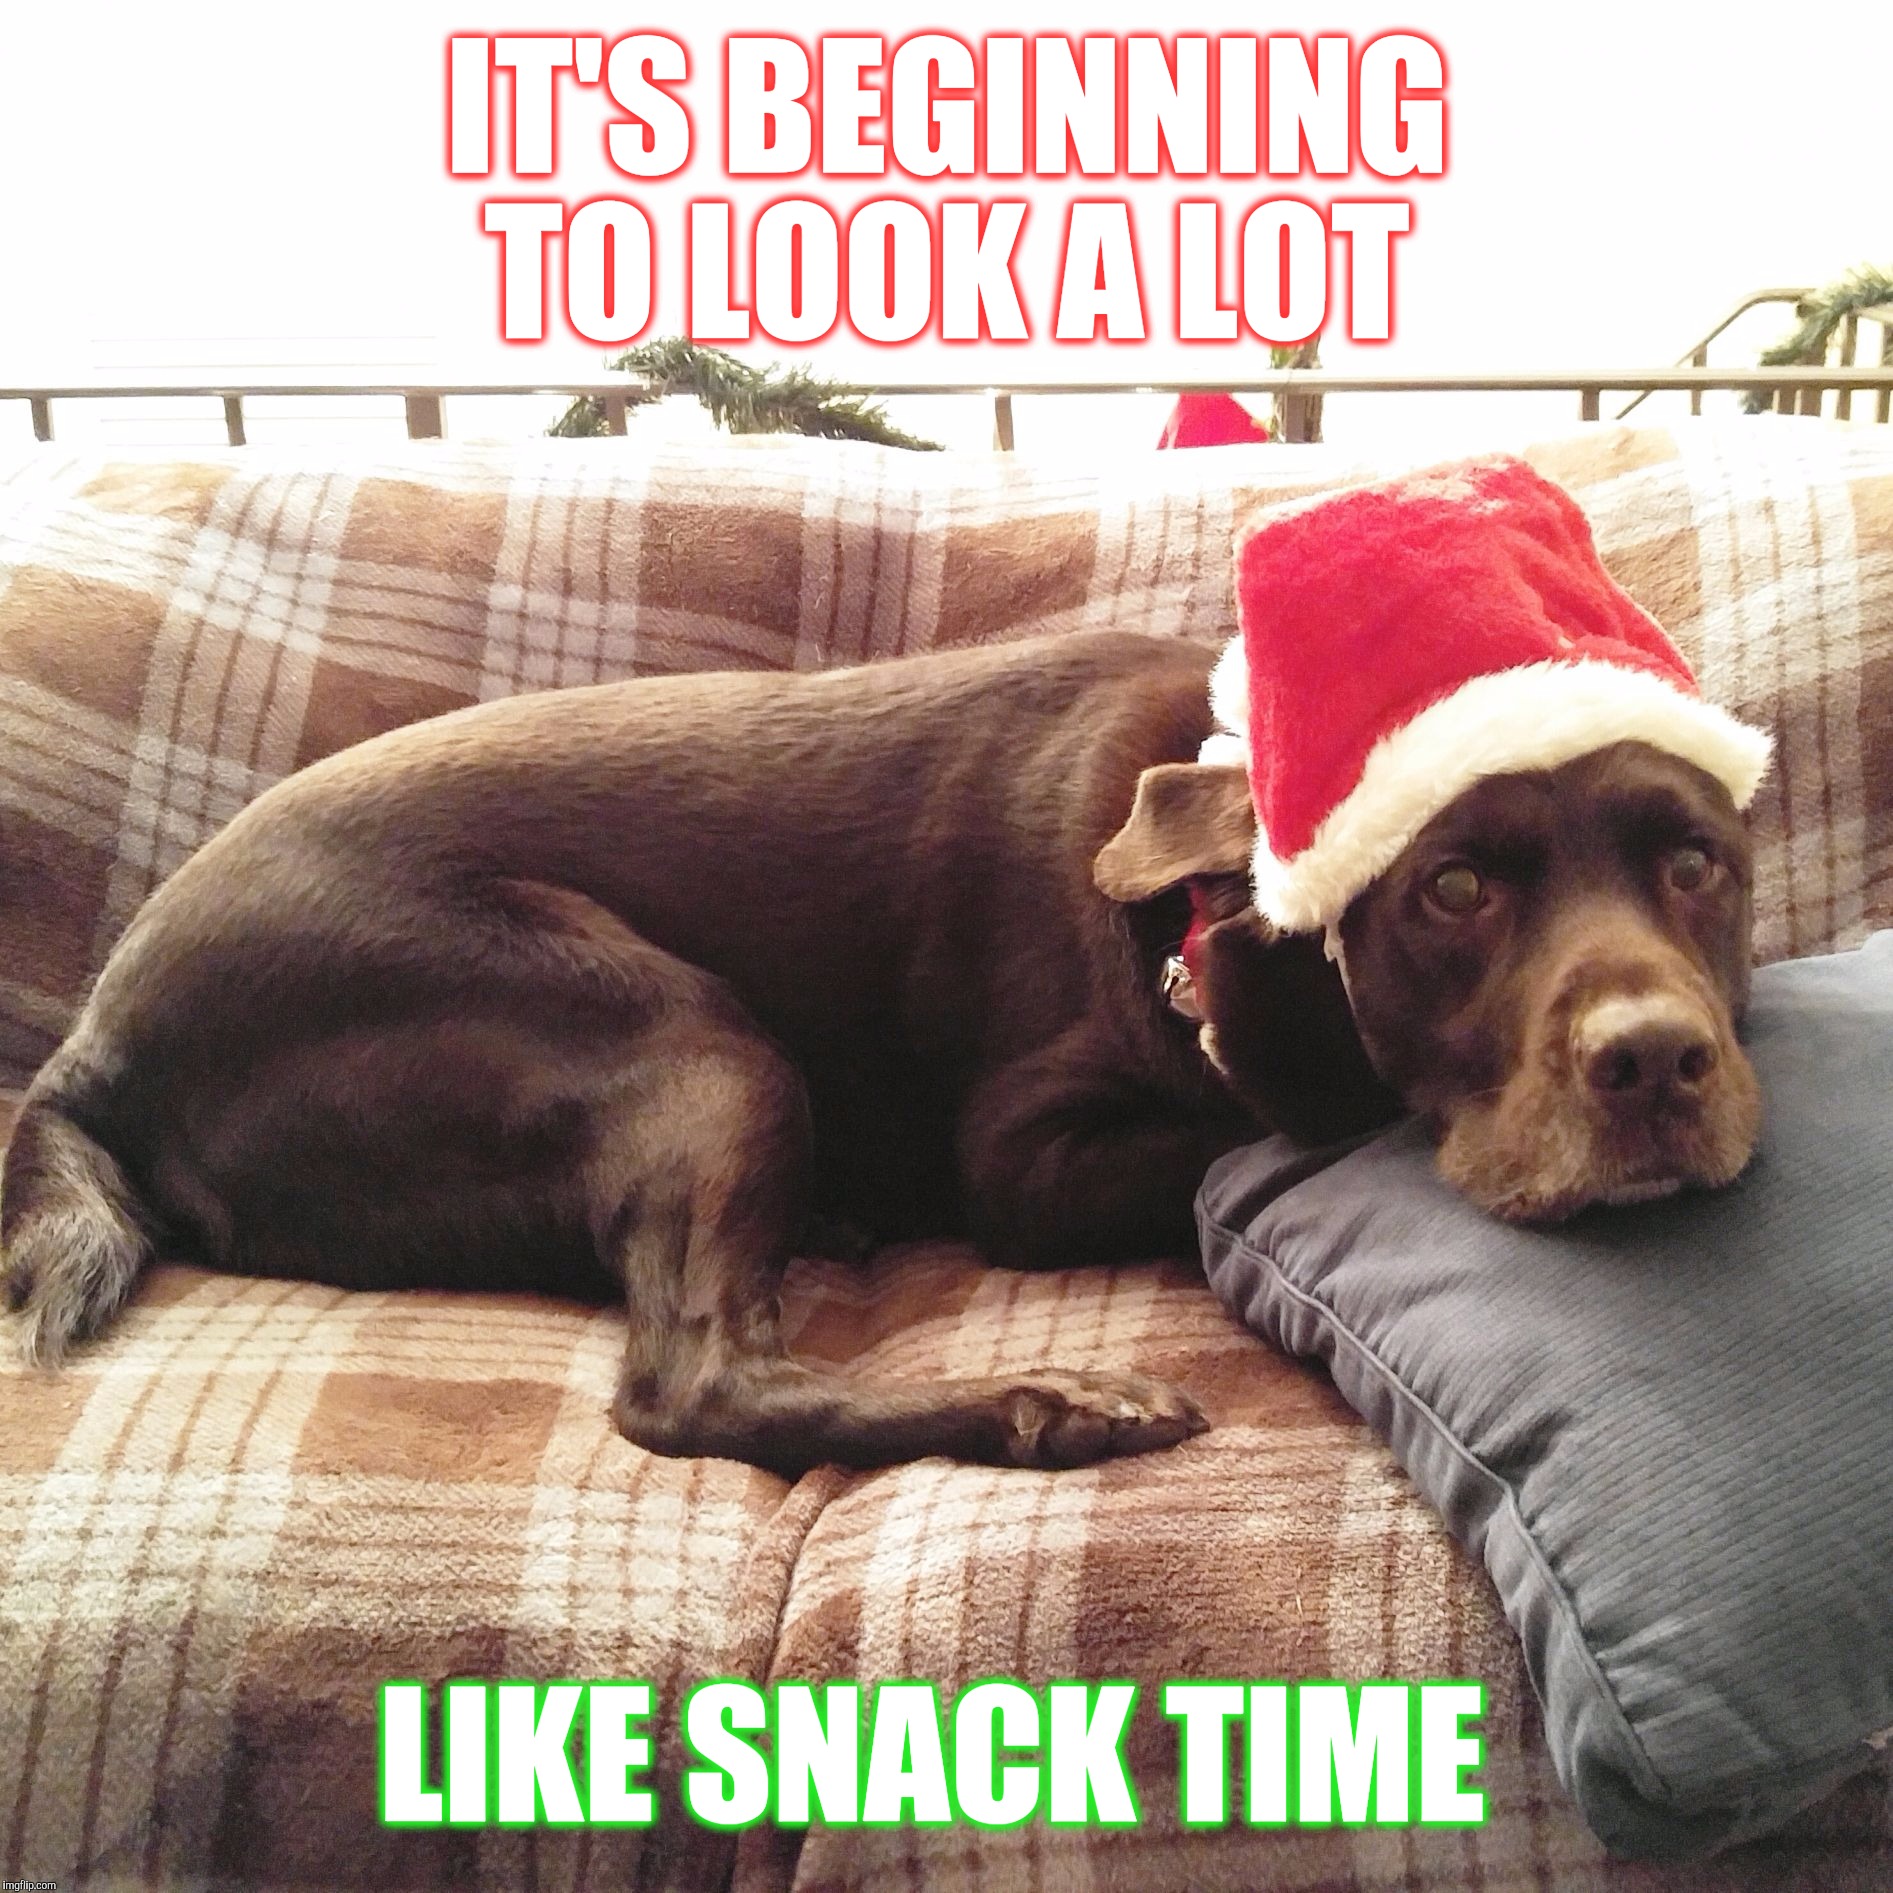 It's beginning to look a lot like snack time  | IT'S BEGINNING TO LOOK A LOT LIKE SNACK TIME | image tagged in chuckie the chocolate lab,hungry,christmas,funny memes,dog,santa clause | made w/ Imgflip meme maker